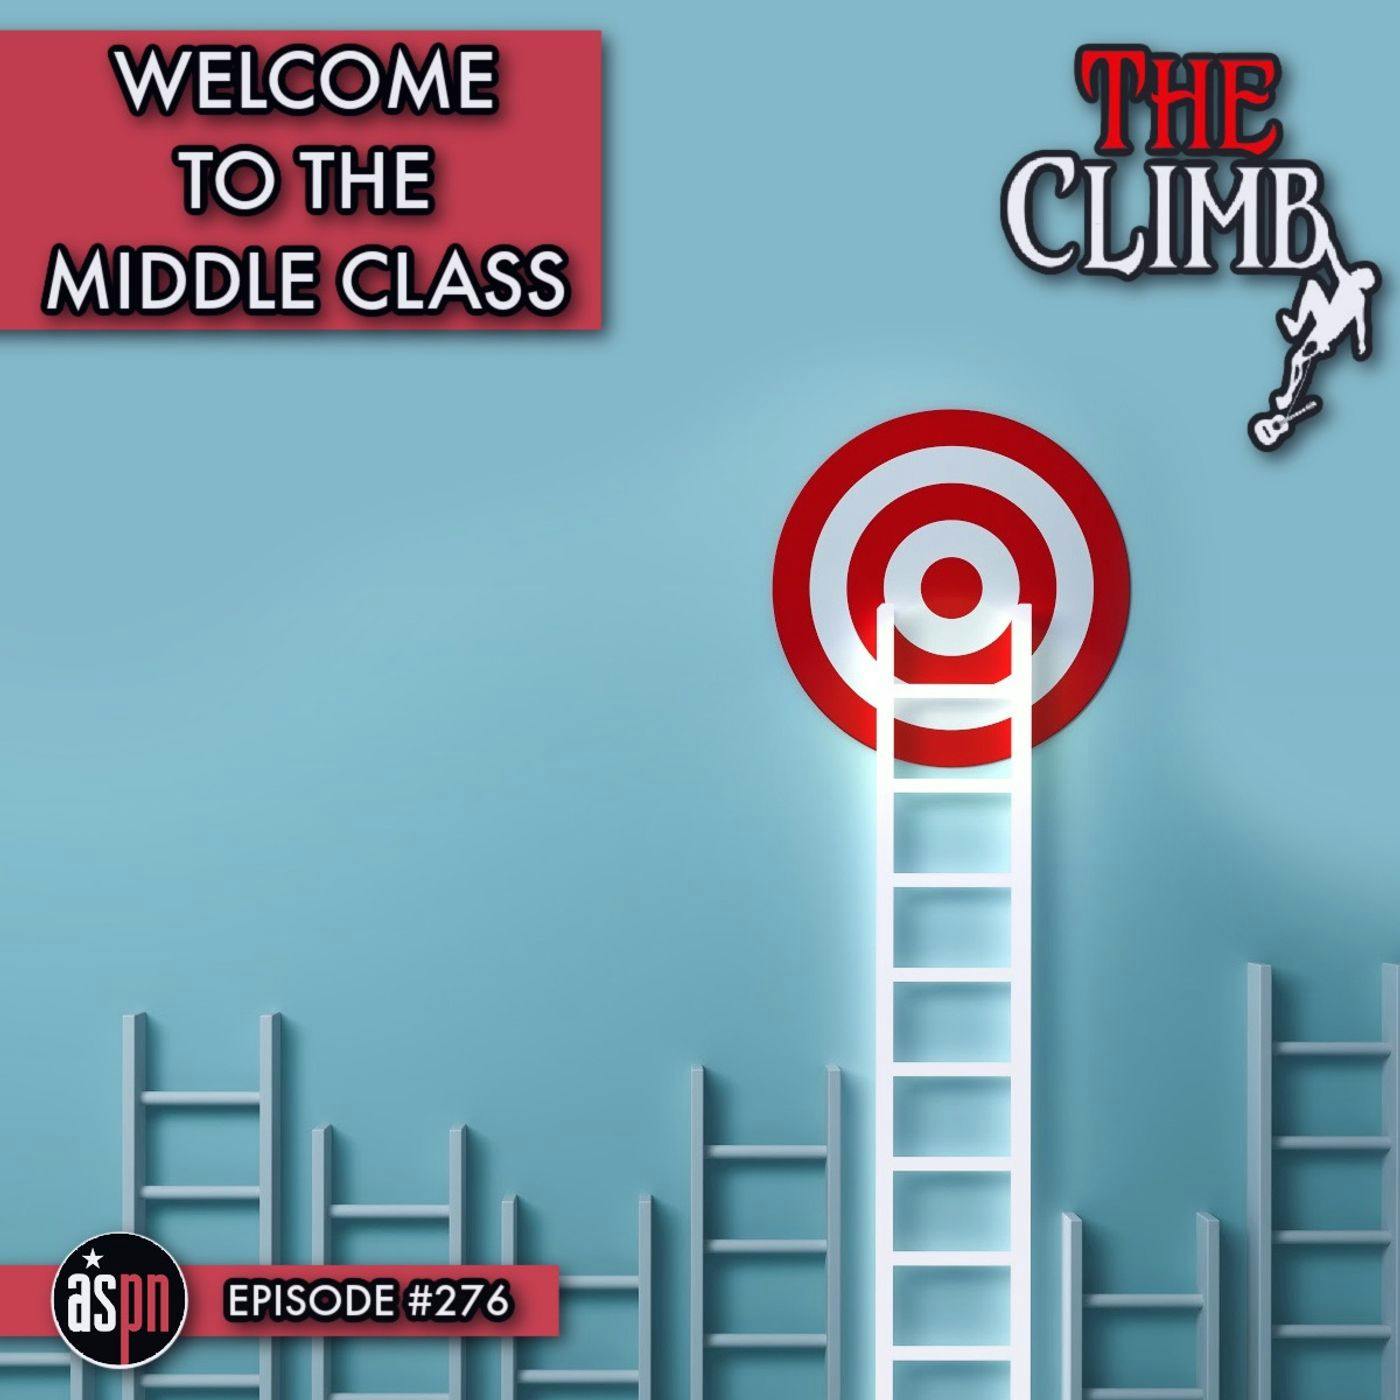 Episode #276: Welcome To The Middle Class